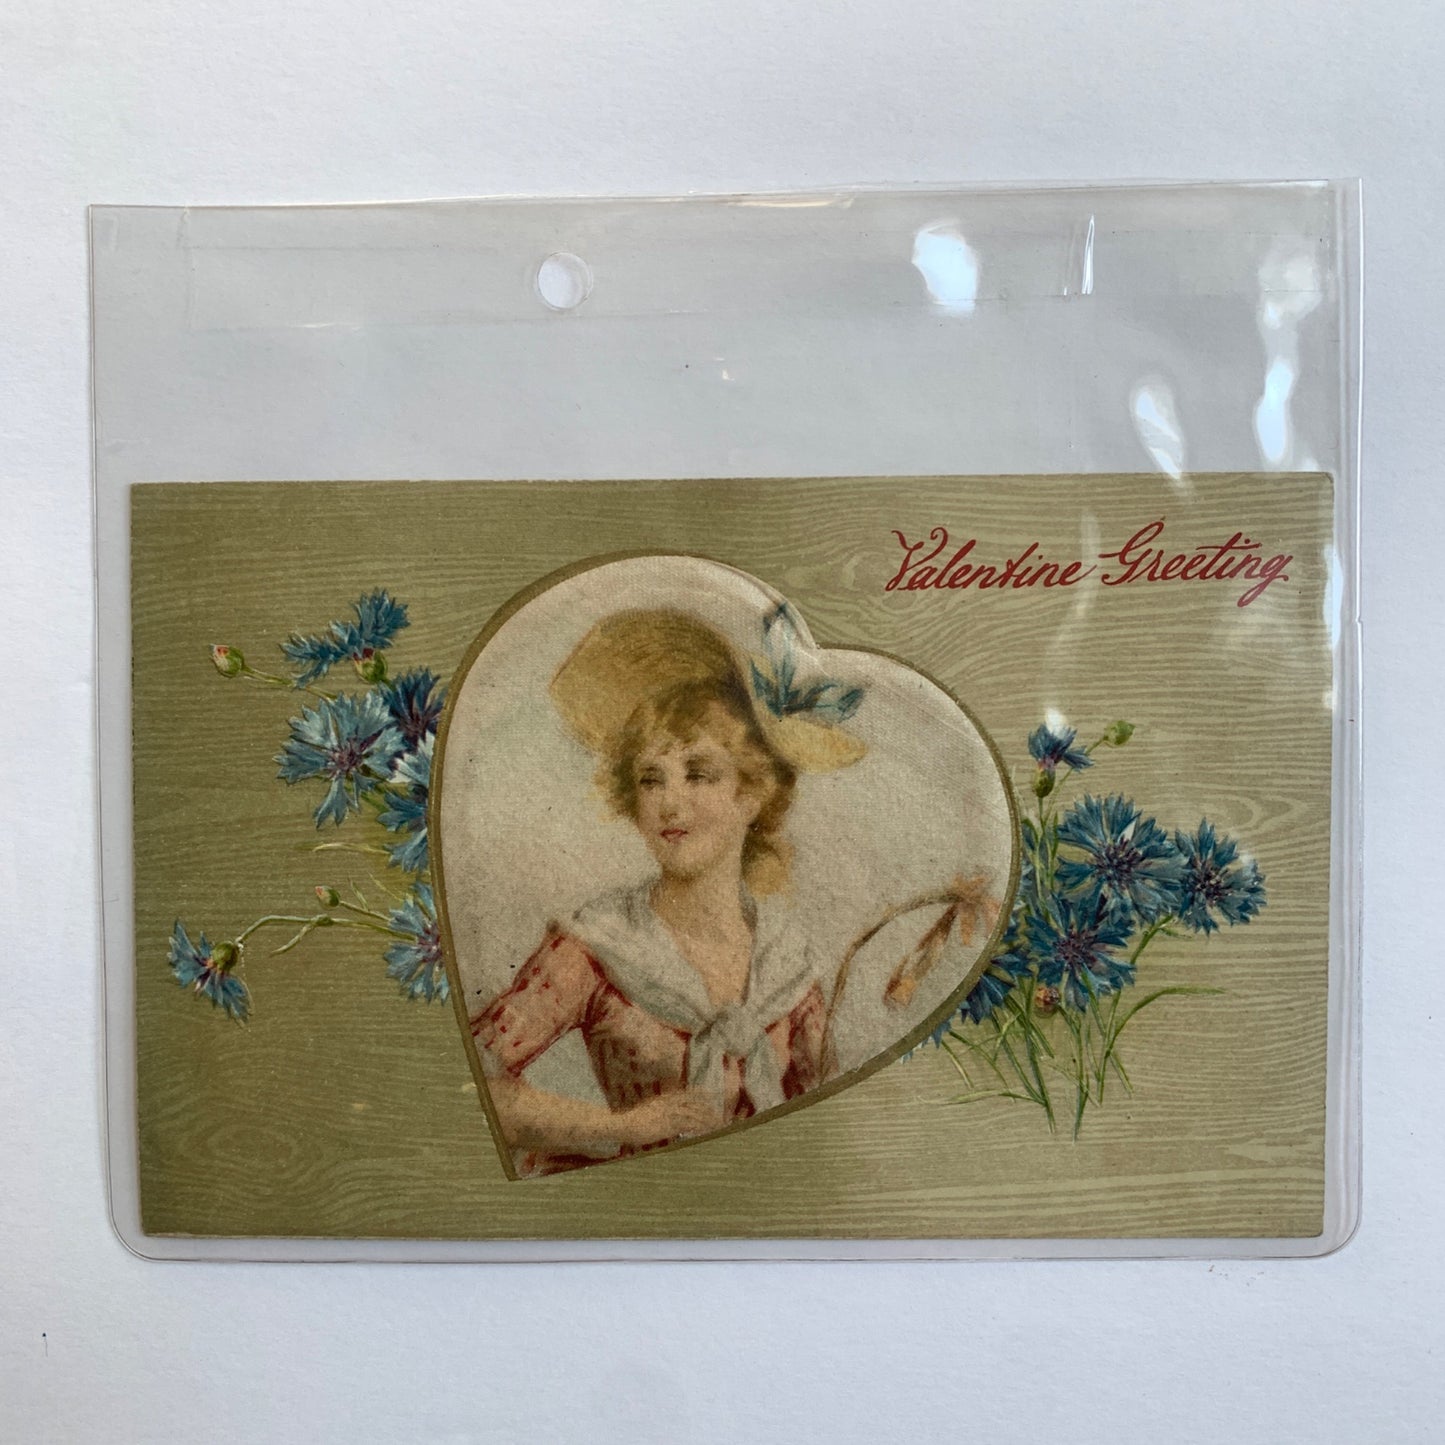 Antique Valentine's Day Postcard Made in Germany